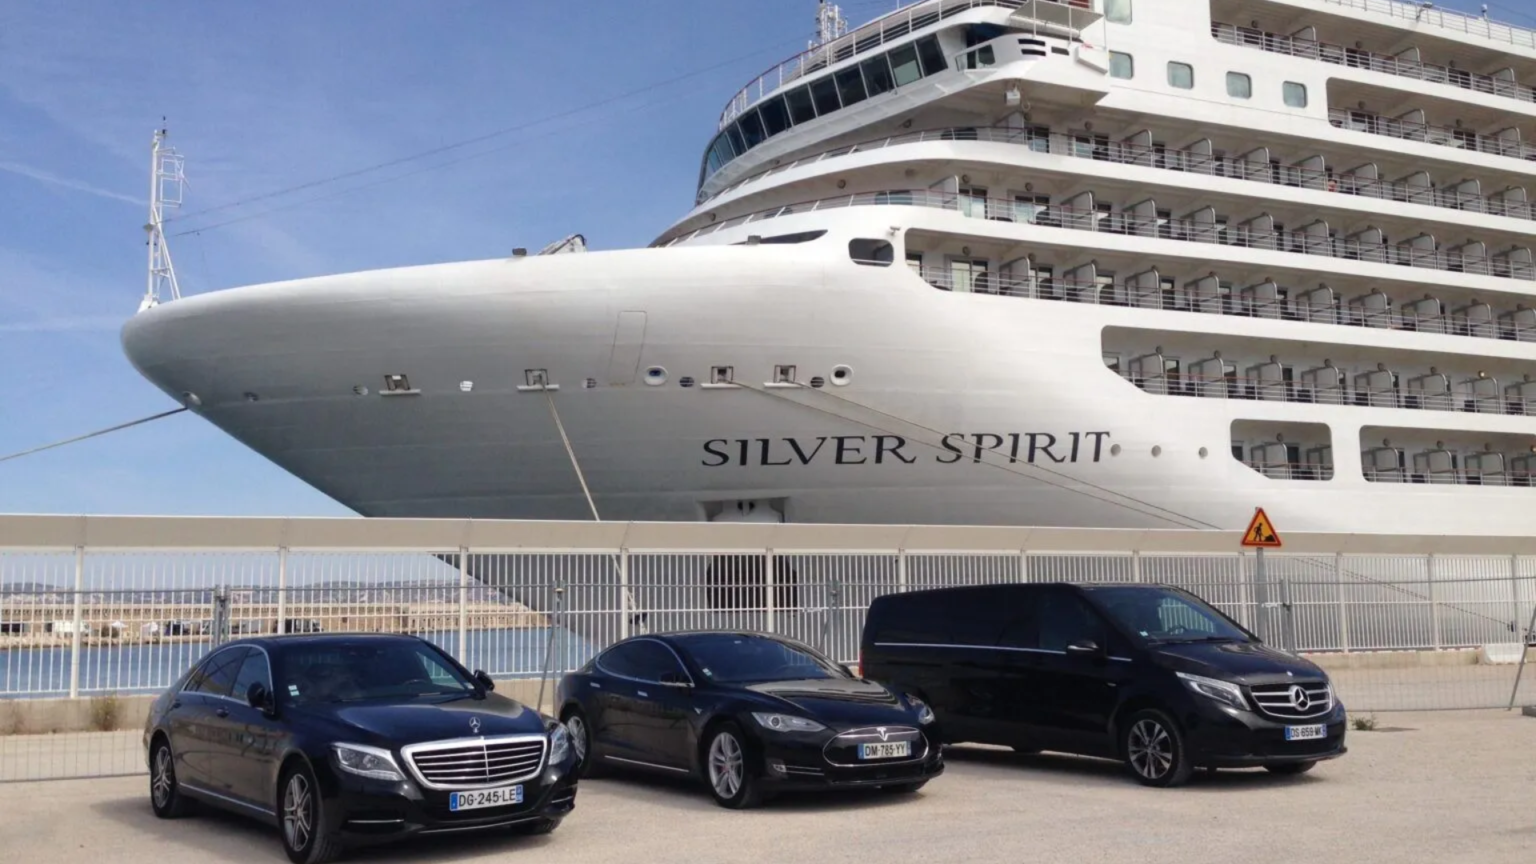 3 limousines of various sizes parked in front of a Silversea cruise ship